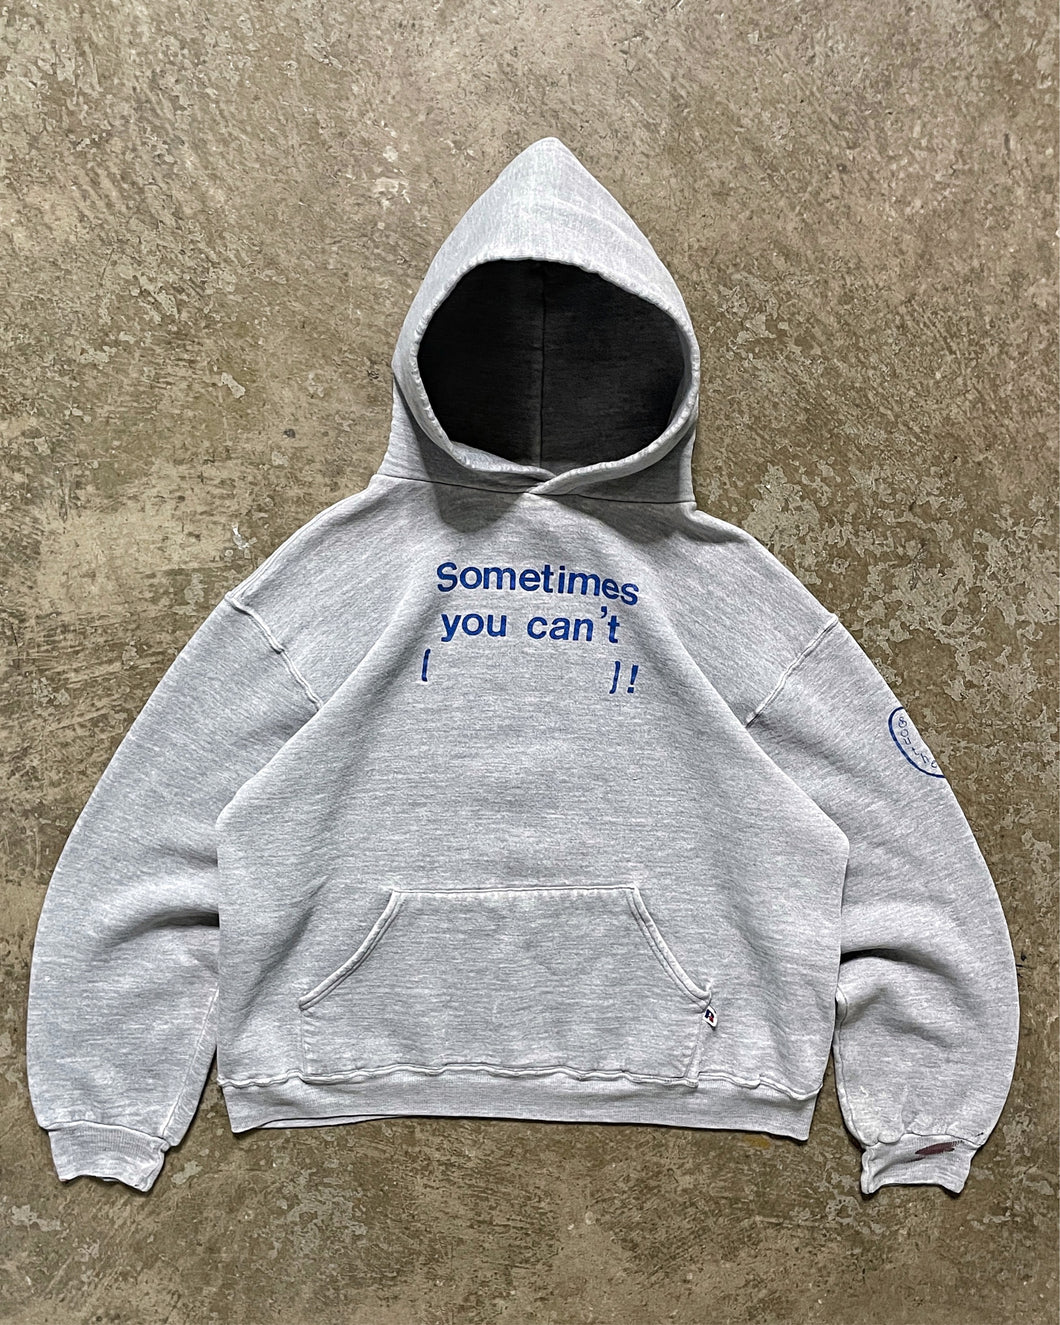 FADED CEMENT GREY “SOMETIMES YOU CAN’T (———)!” RUSSELL HOODIE - 1980S